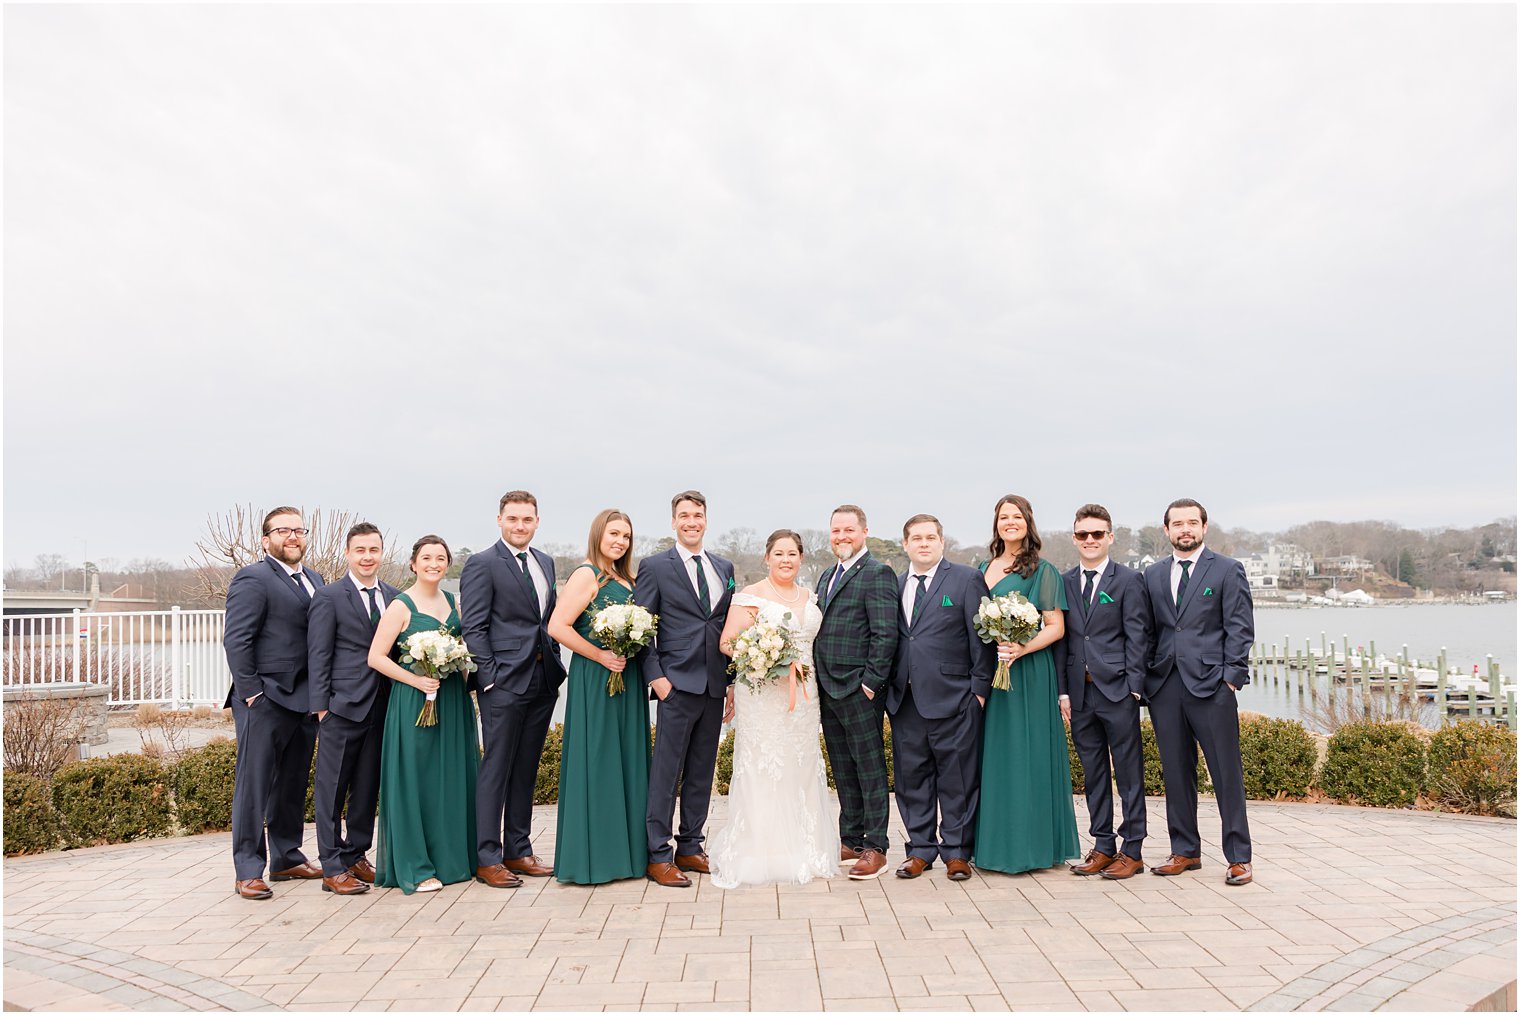 bride and groom stand with wedding party in teal gowns and plaid suits